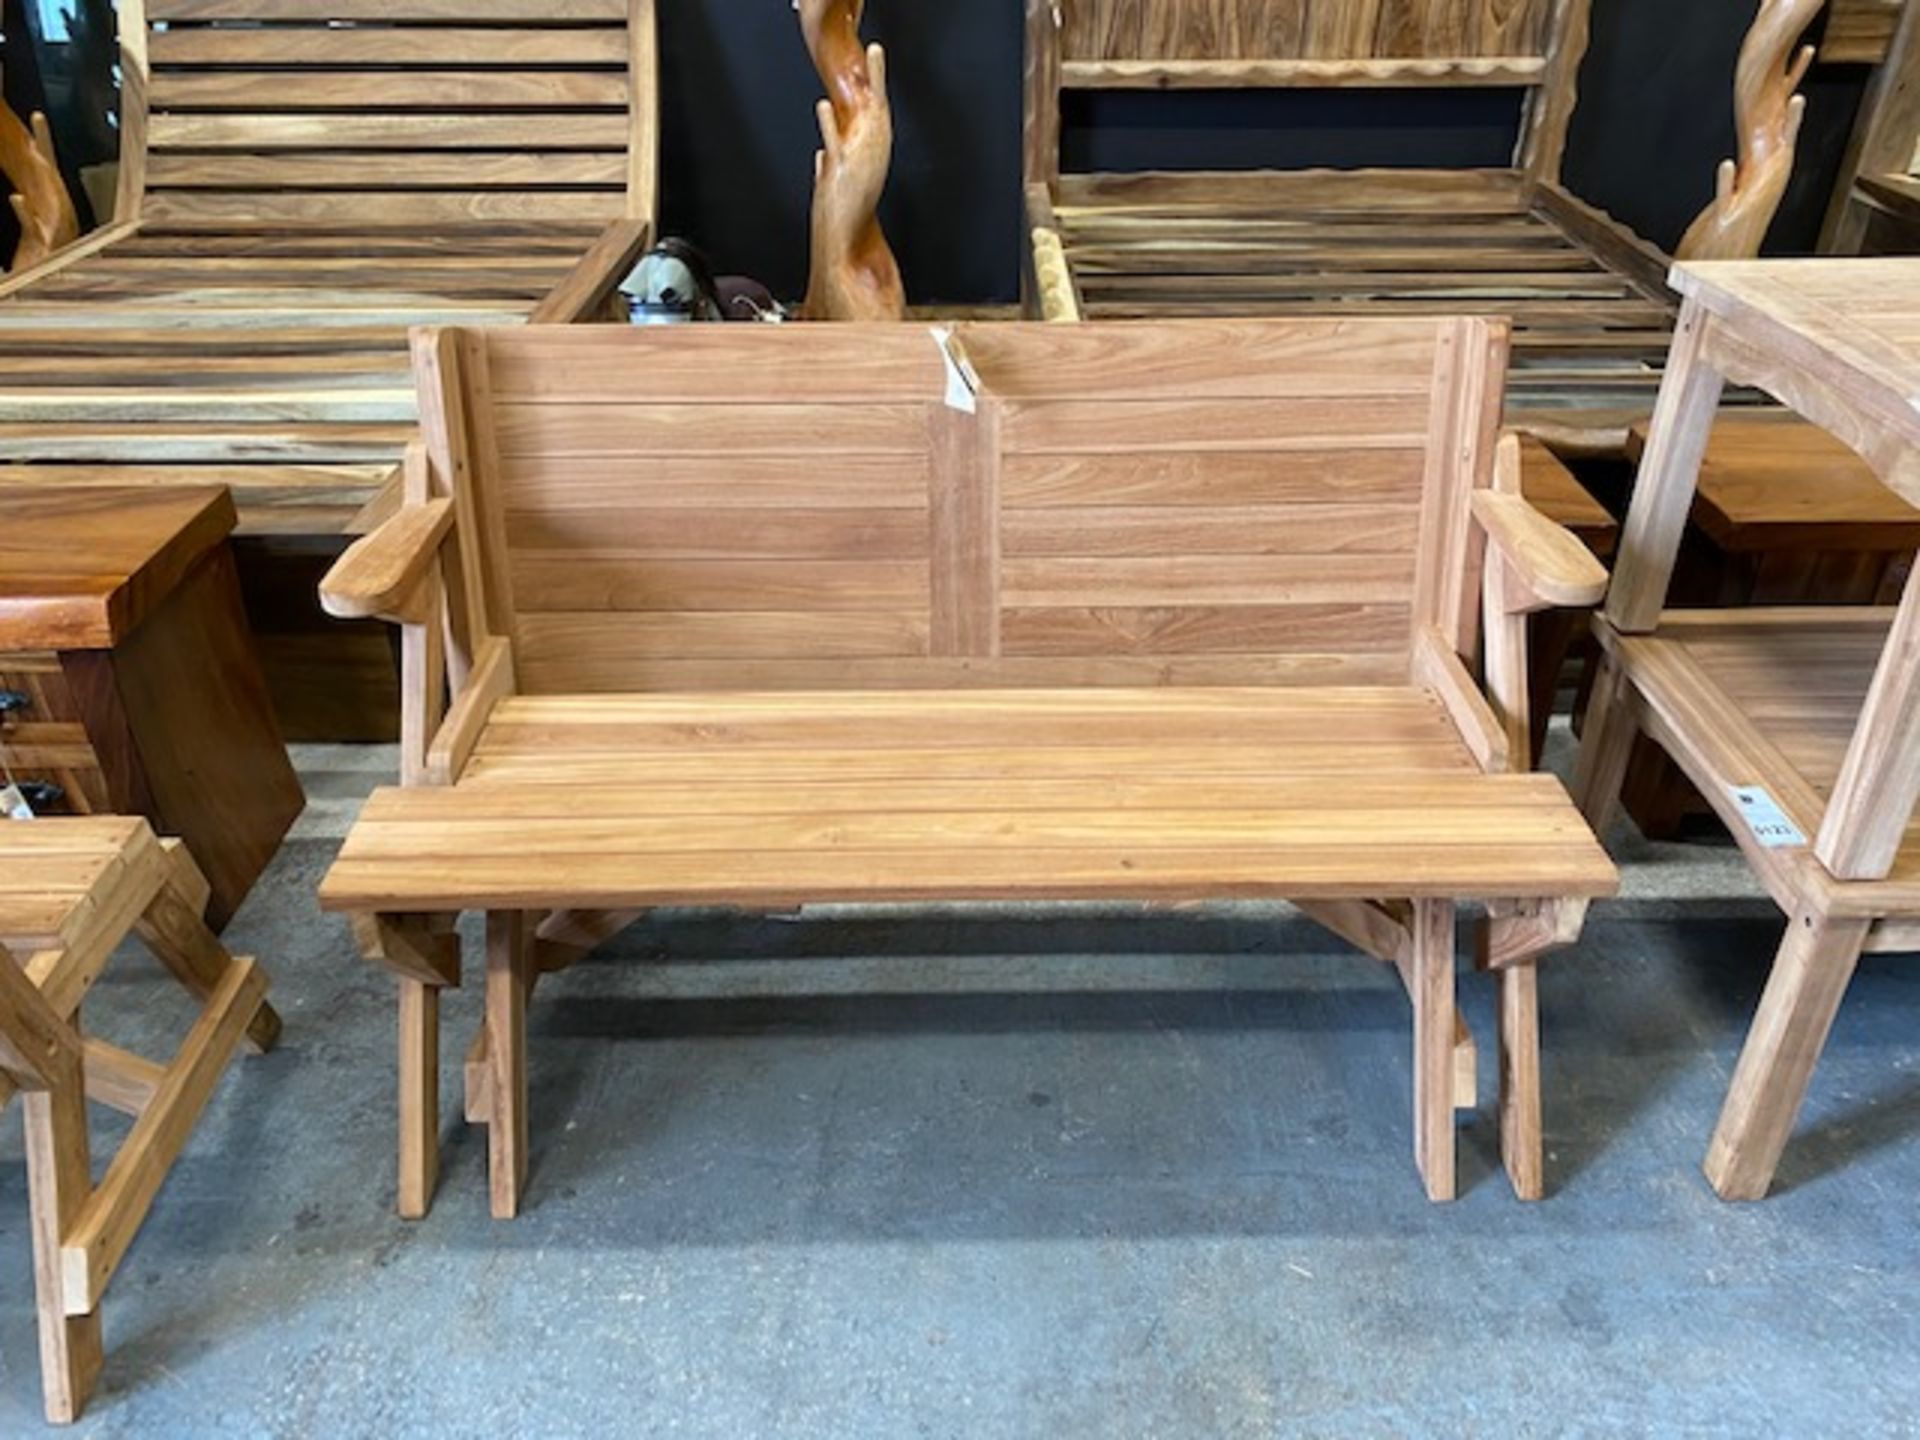 BRAND NEW SOLID TEAK WOODEN PICNIC BENCH 135 X 58 X 86cm RRP £500 - Image 2 of 3